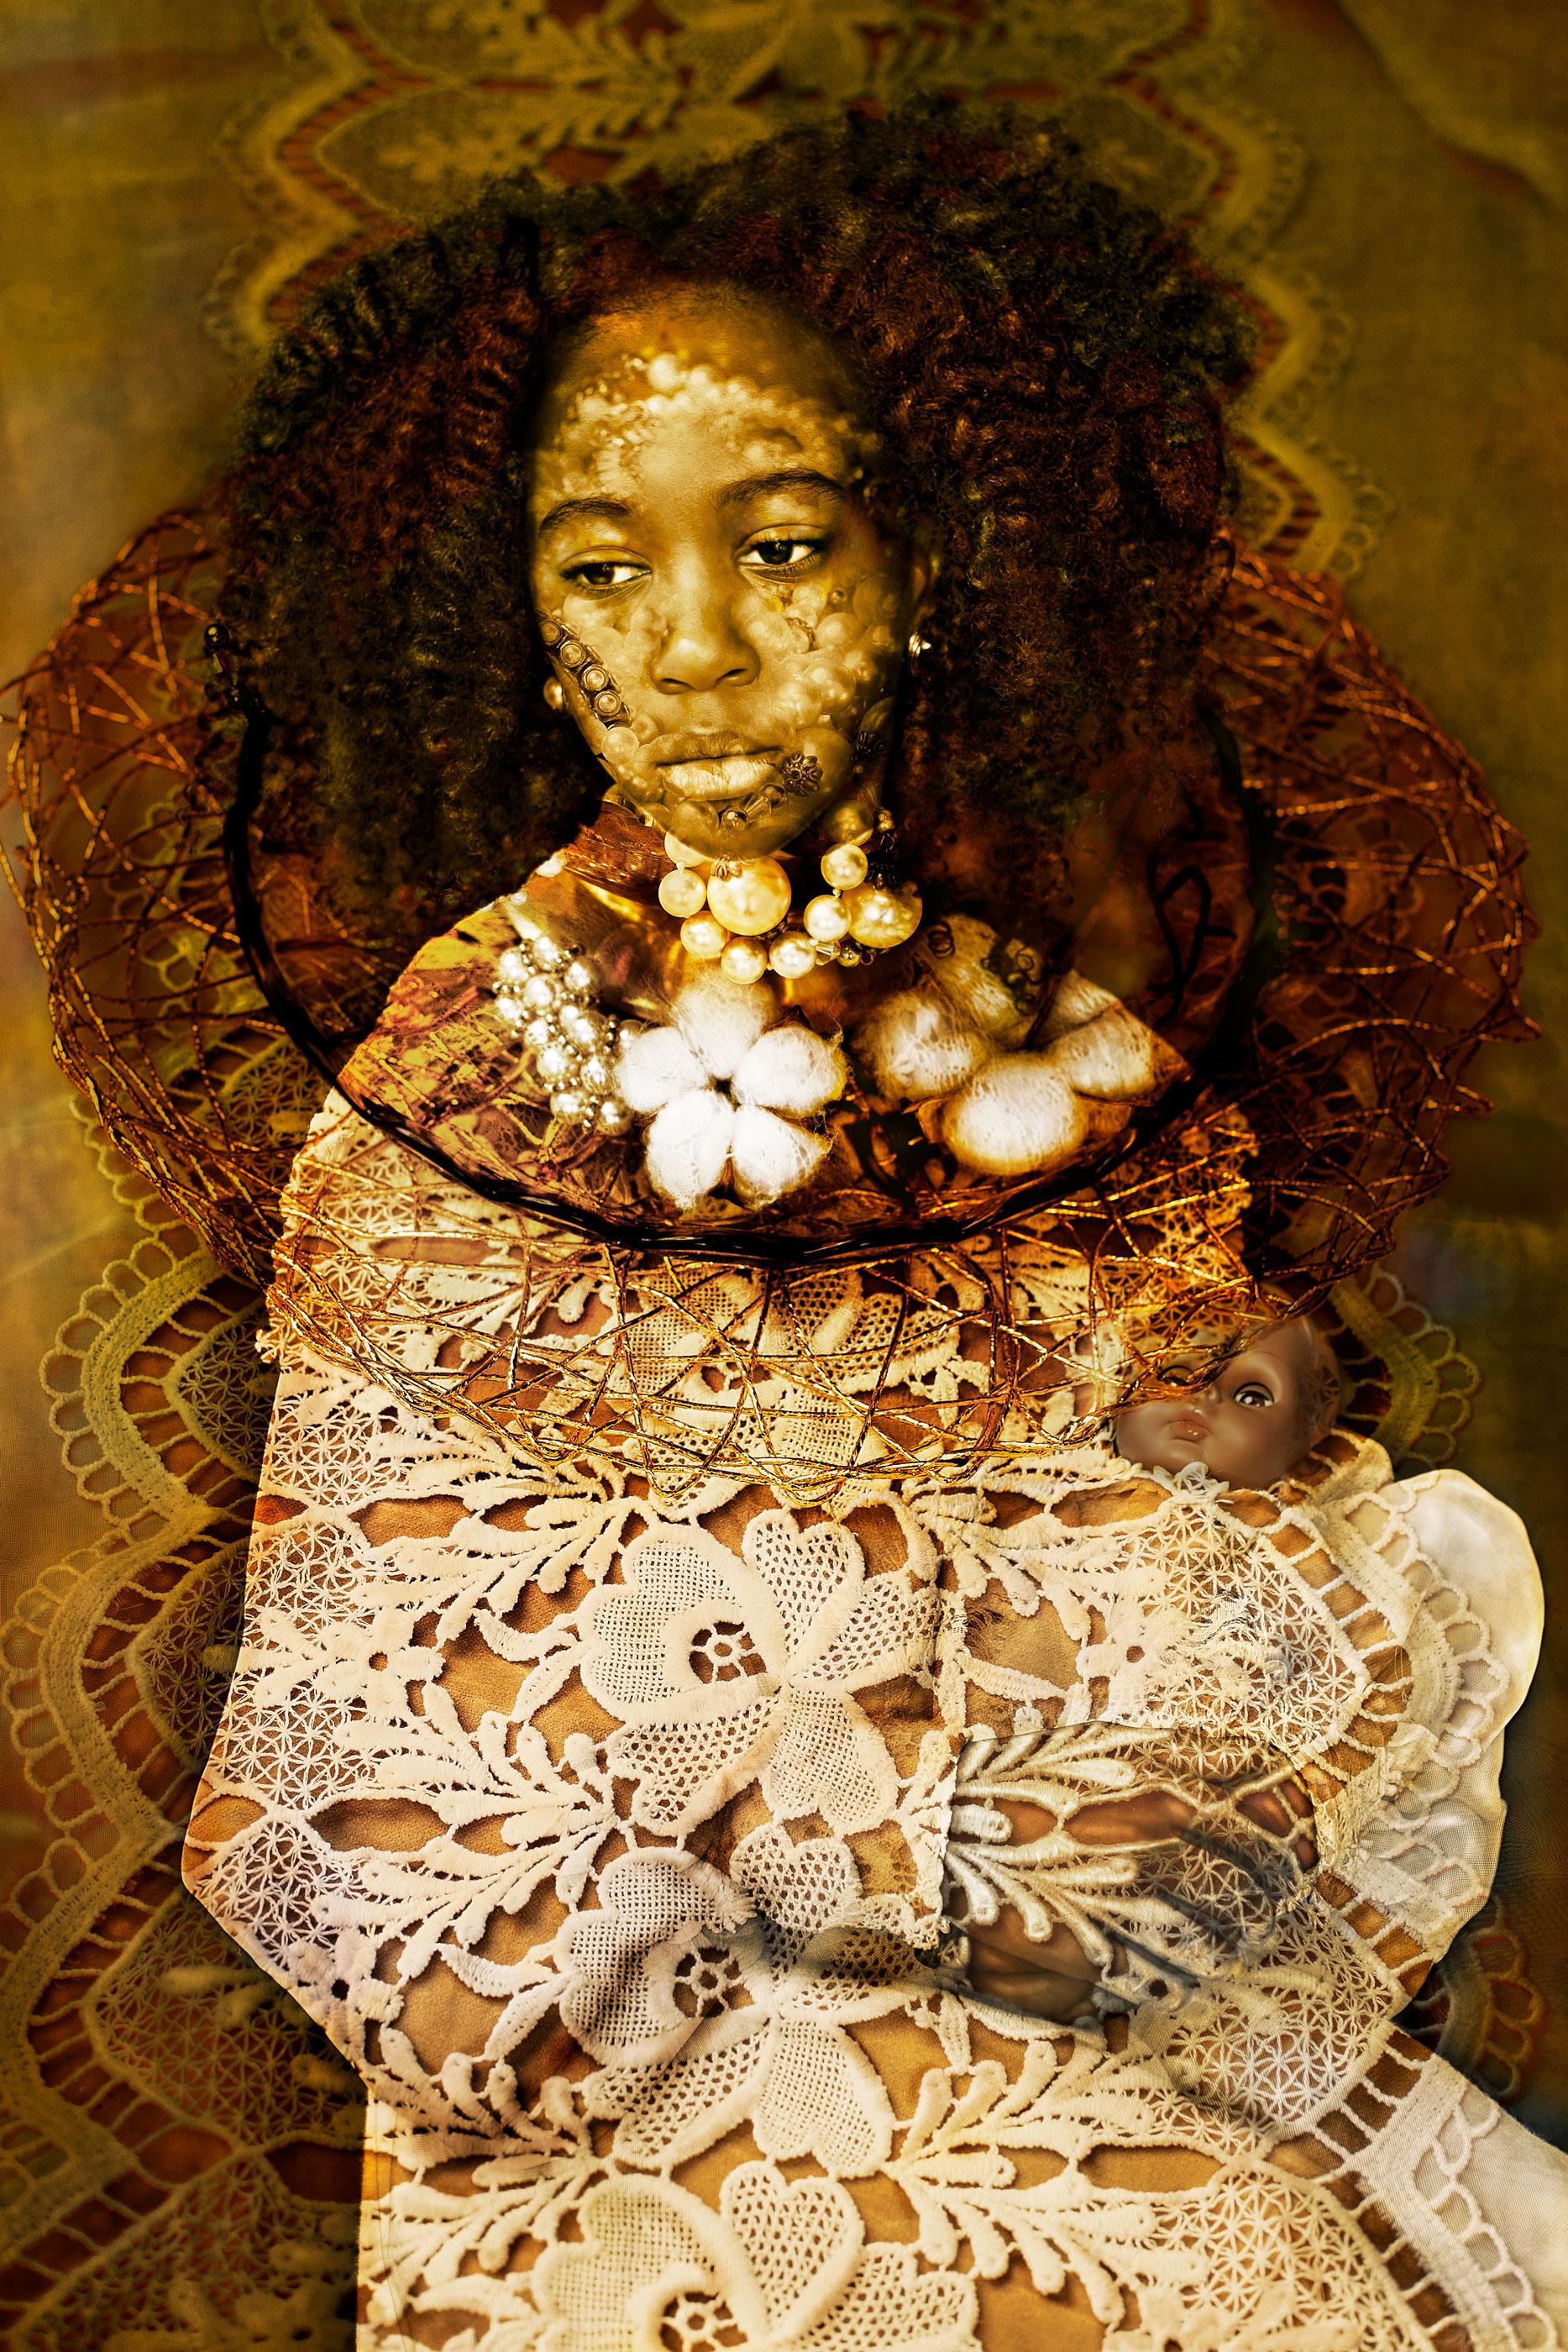 Tokie Rome-Taylor Color Photograph - "Embedded Worth" - contemporary digitally manipulated portraiture, Kehinde Wiley